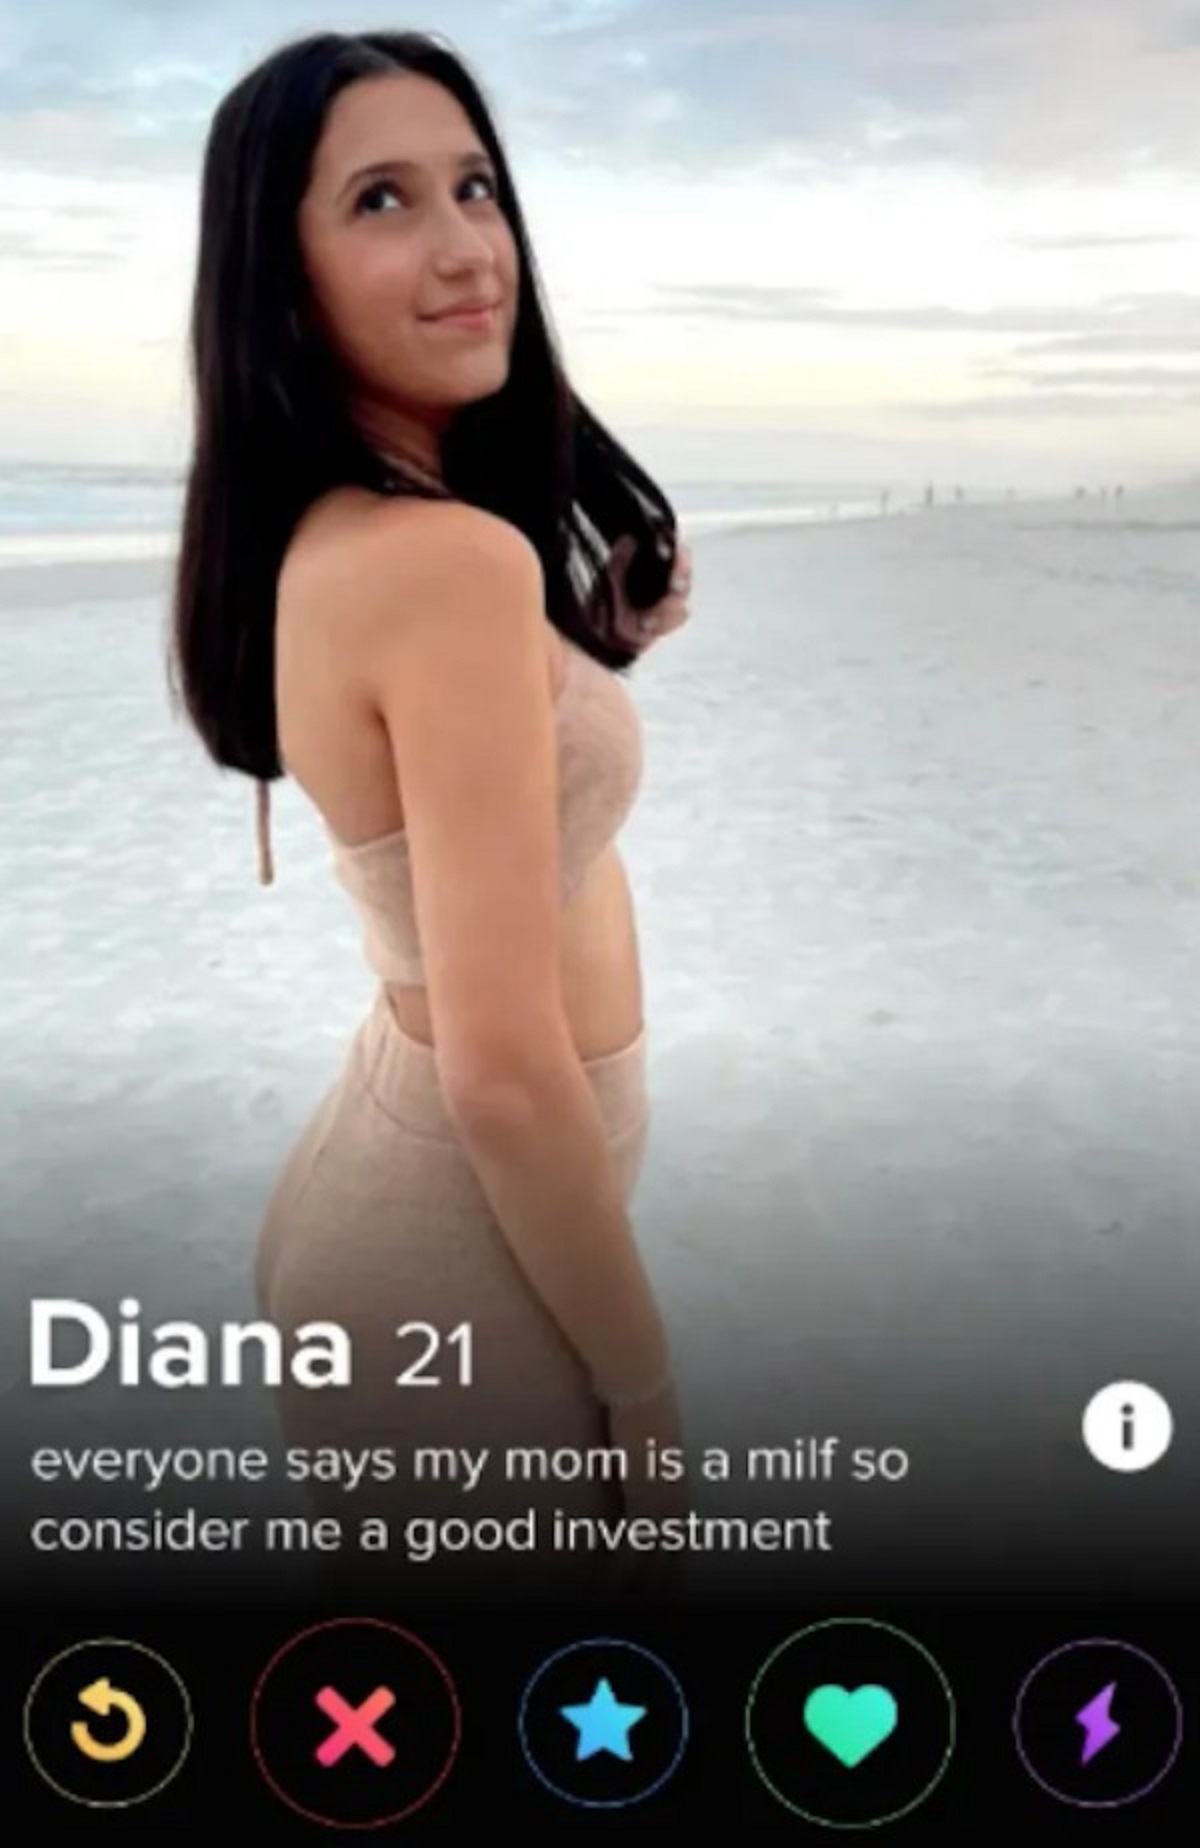 adhi pribadi recommends tinder for milfs pic